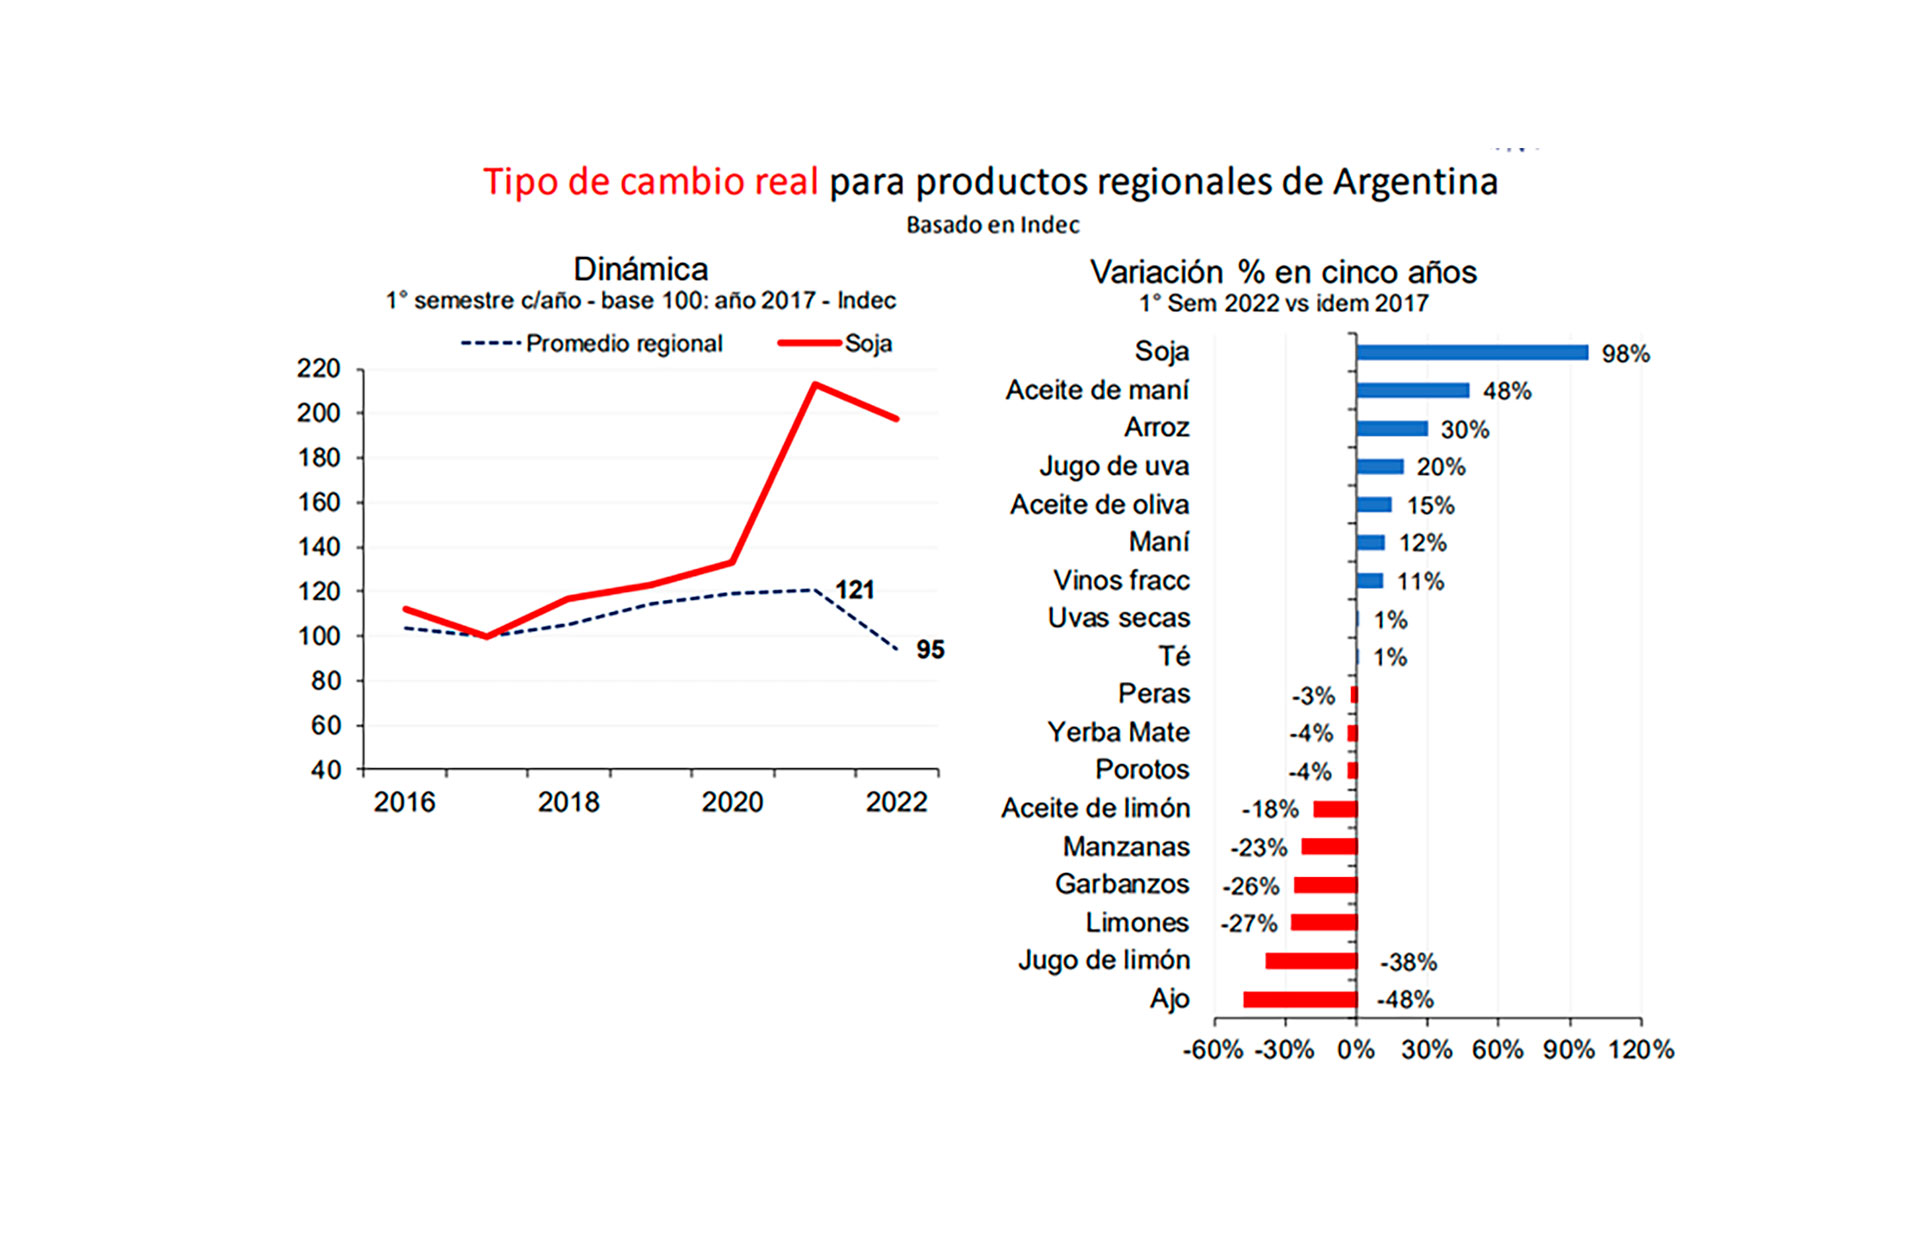 The graph, from the study by Day, compares the evolution of the external competitiveness of soybeans and non-Pampas agricultural products